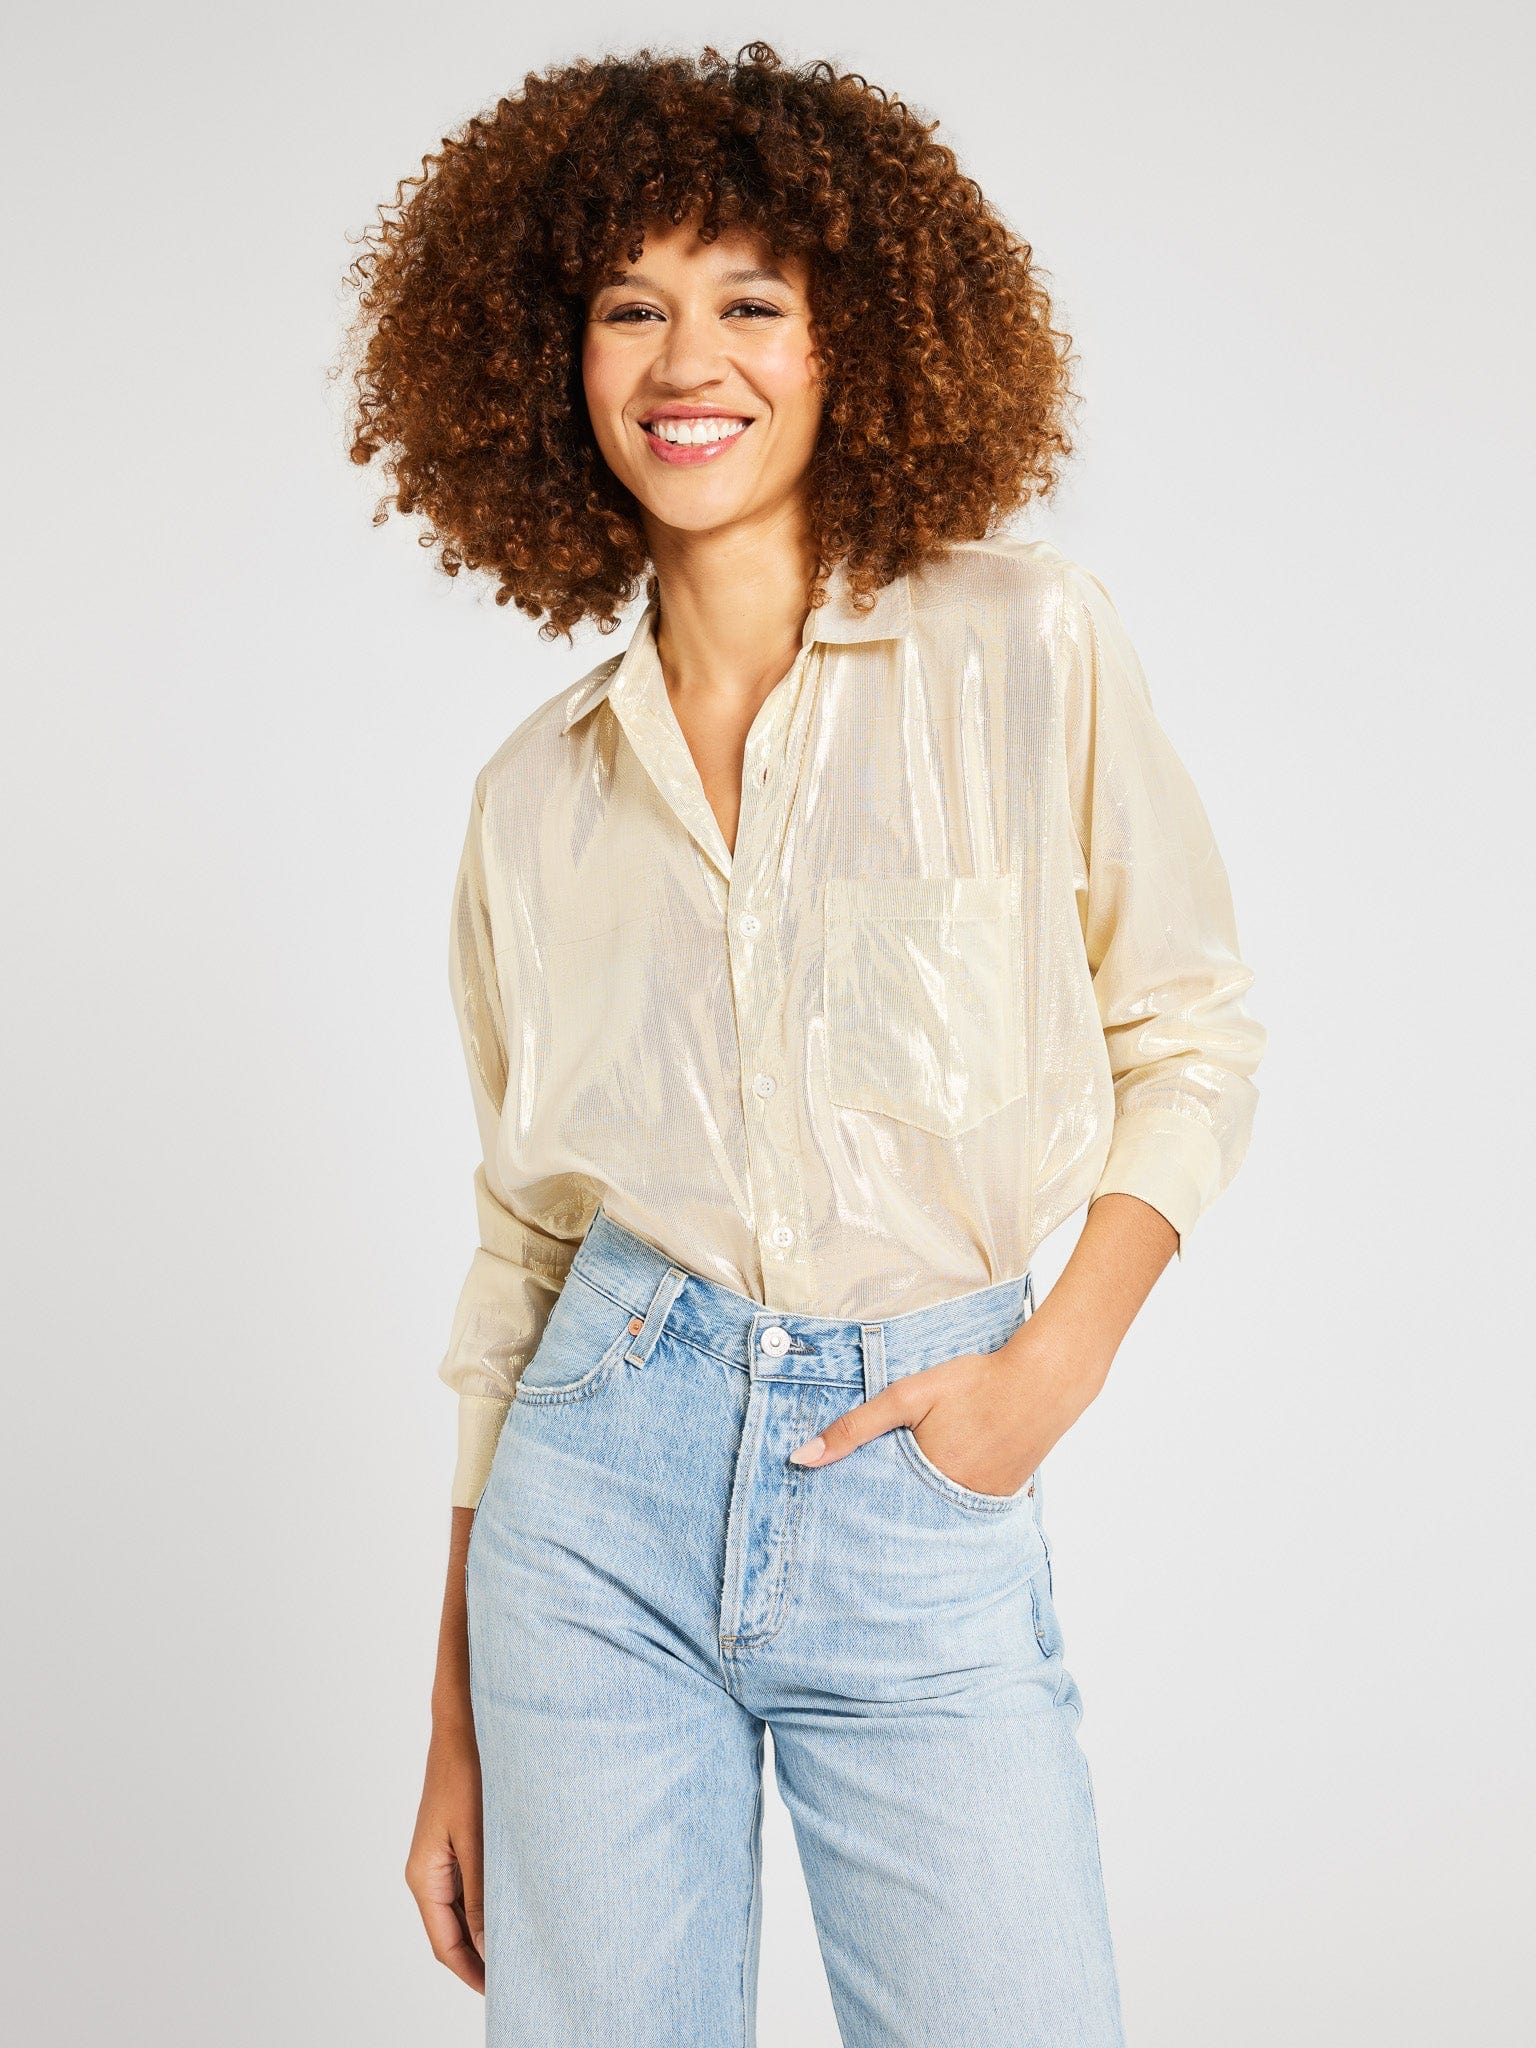 MILLE Clothing Sofia Top in Gold Lamé